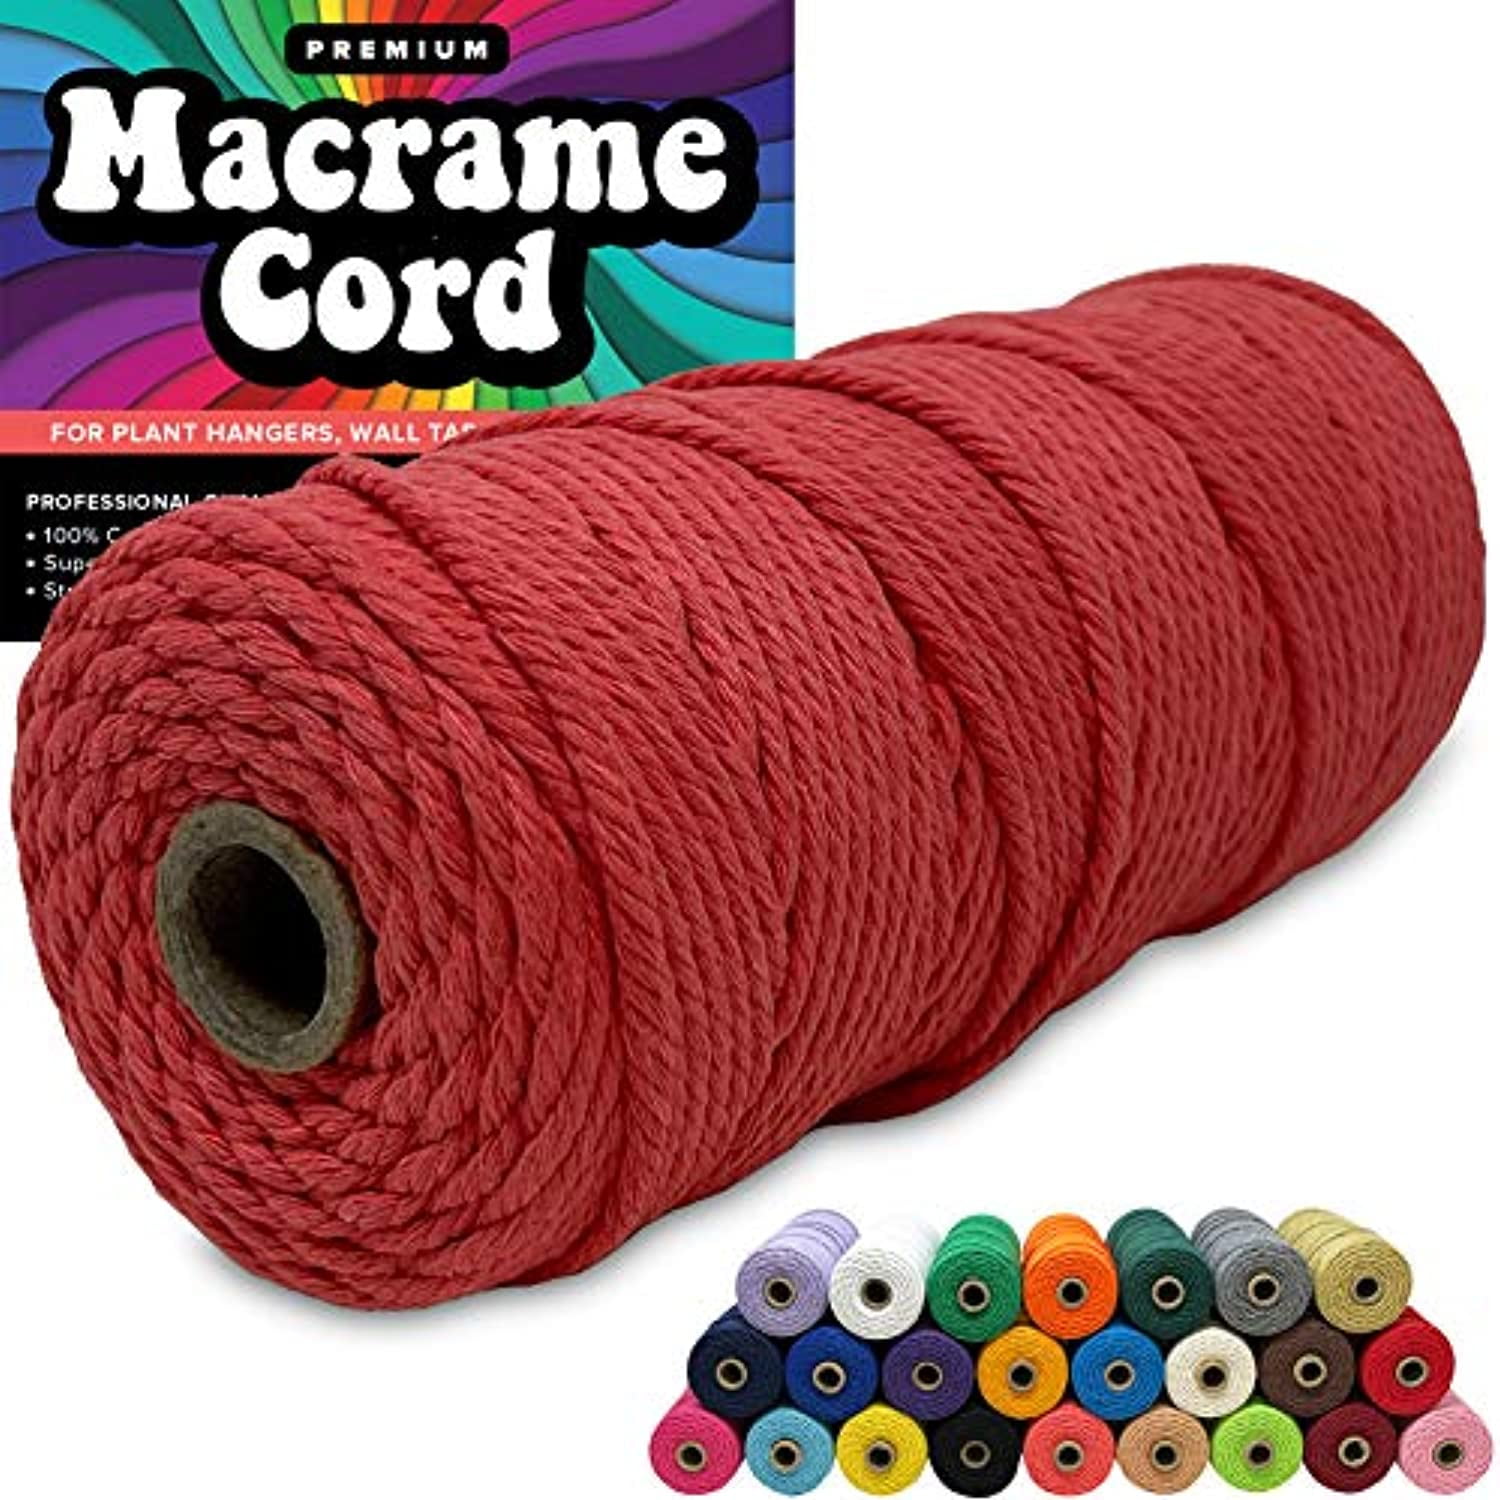 Macrame Cord 4mm 3mm or 5mm rope single twisted natural 100% cotton